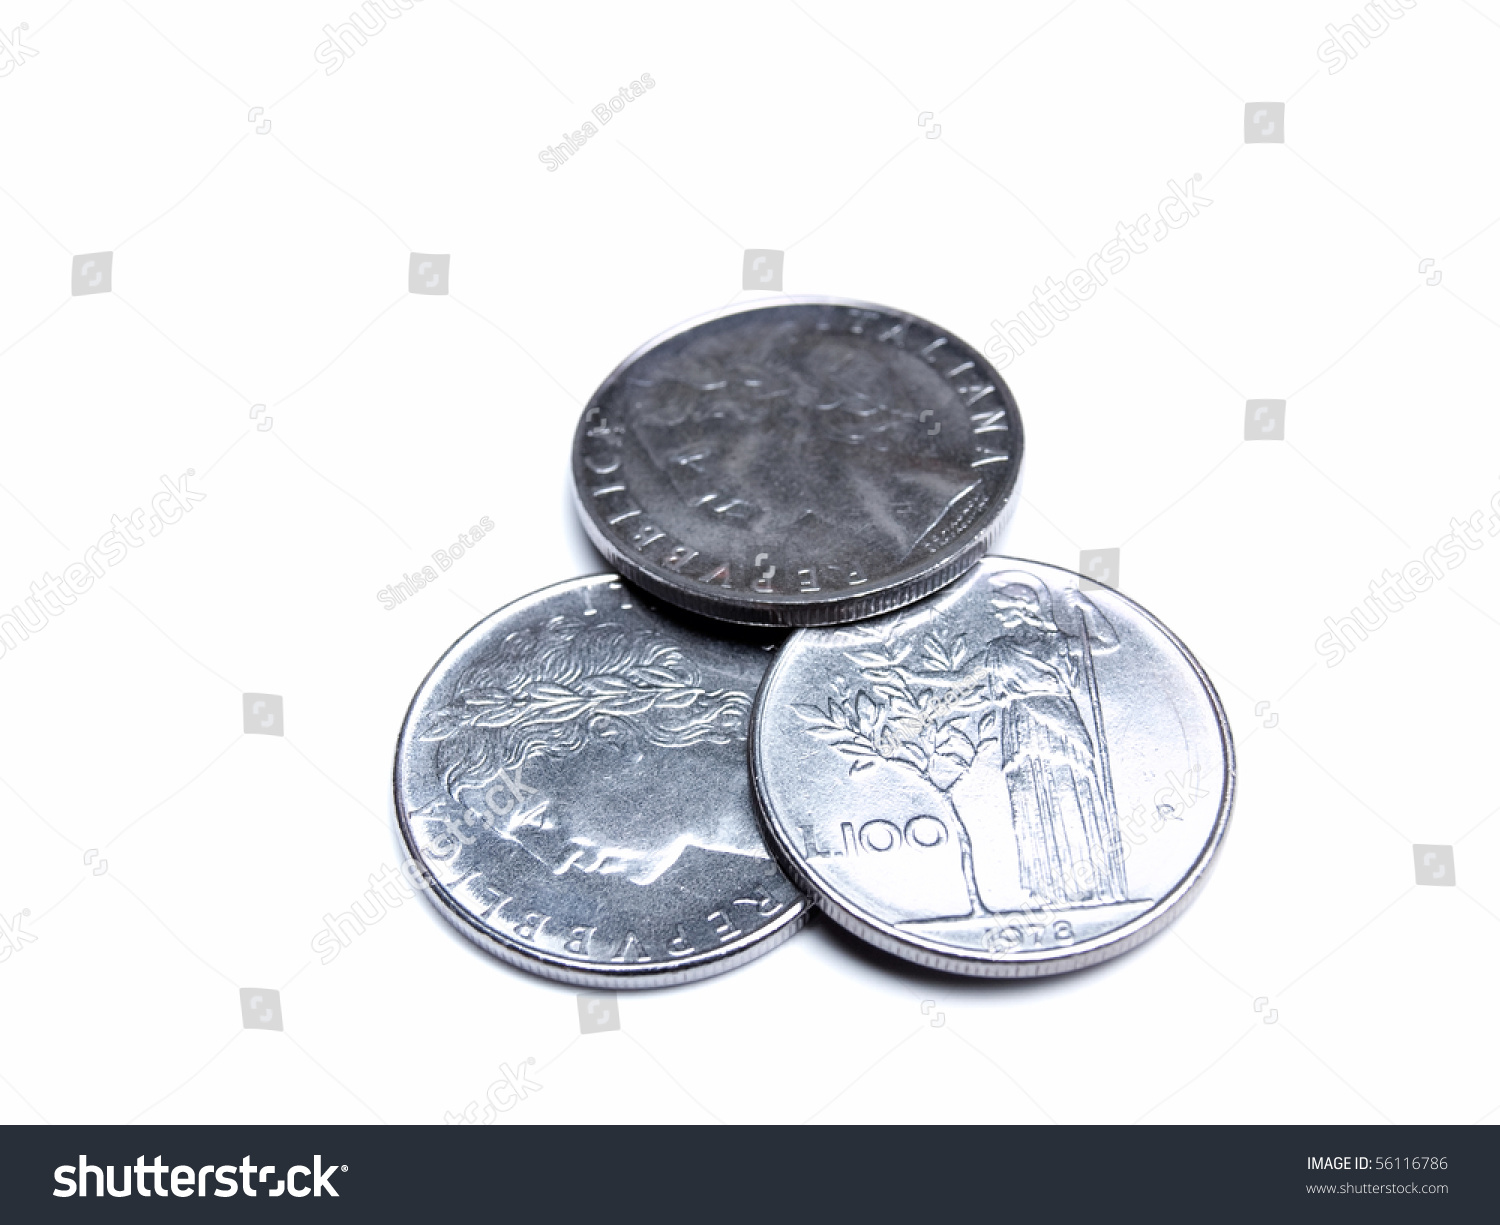 Old Italian Money Or Coins Before The Euro On A White Background Stock